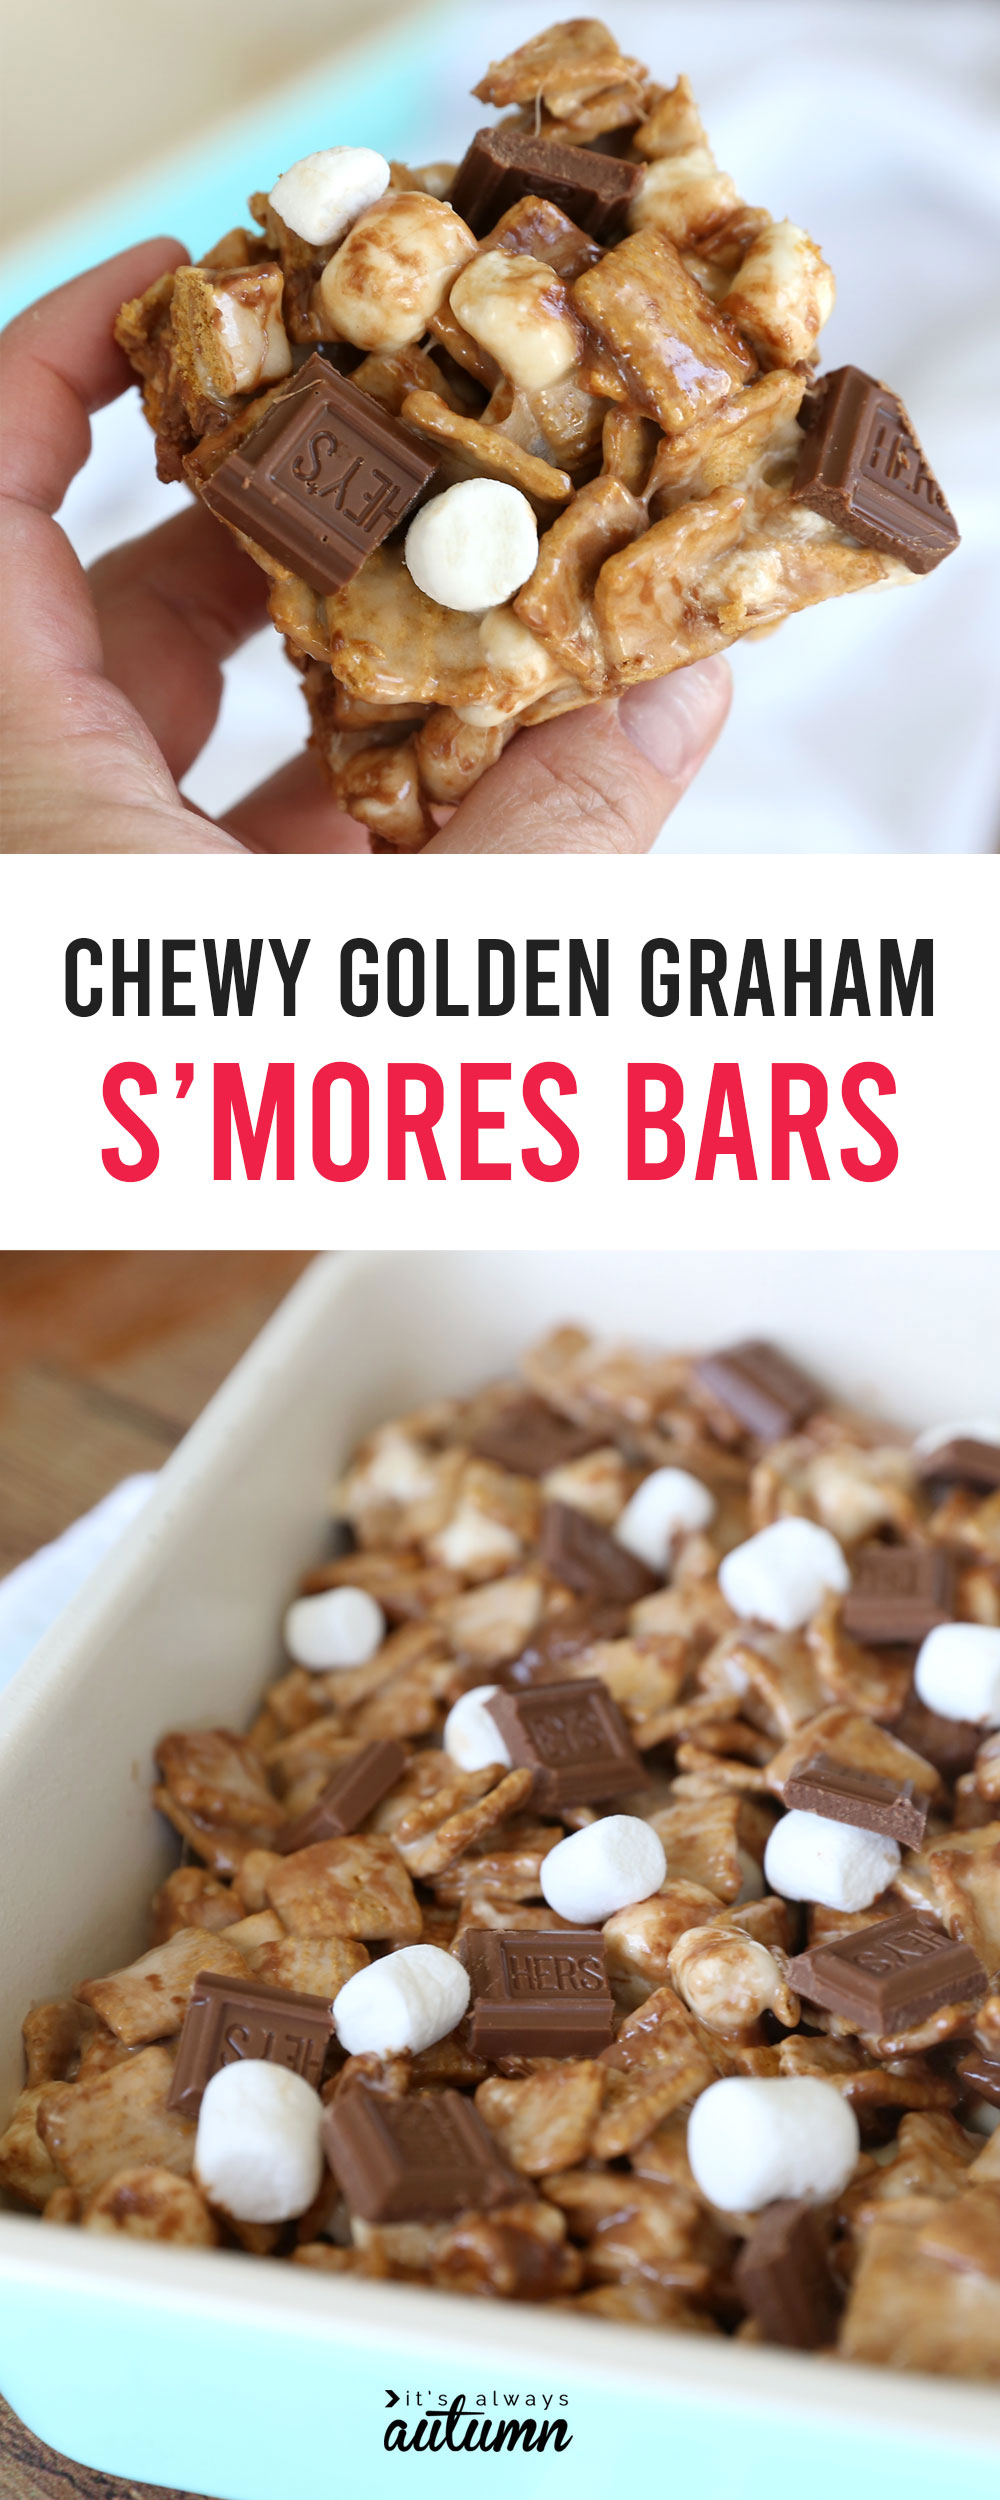 Chewy S'mores bars made with Golden Grahams, marshmallows, and milk chocolate